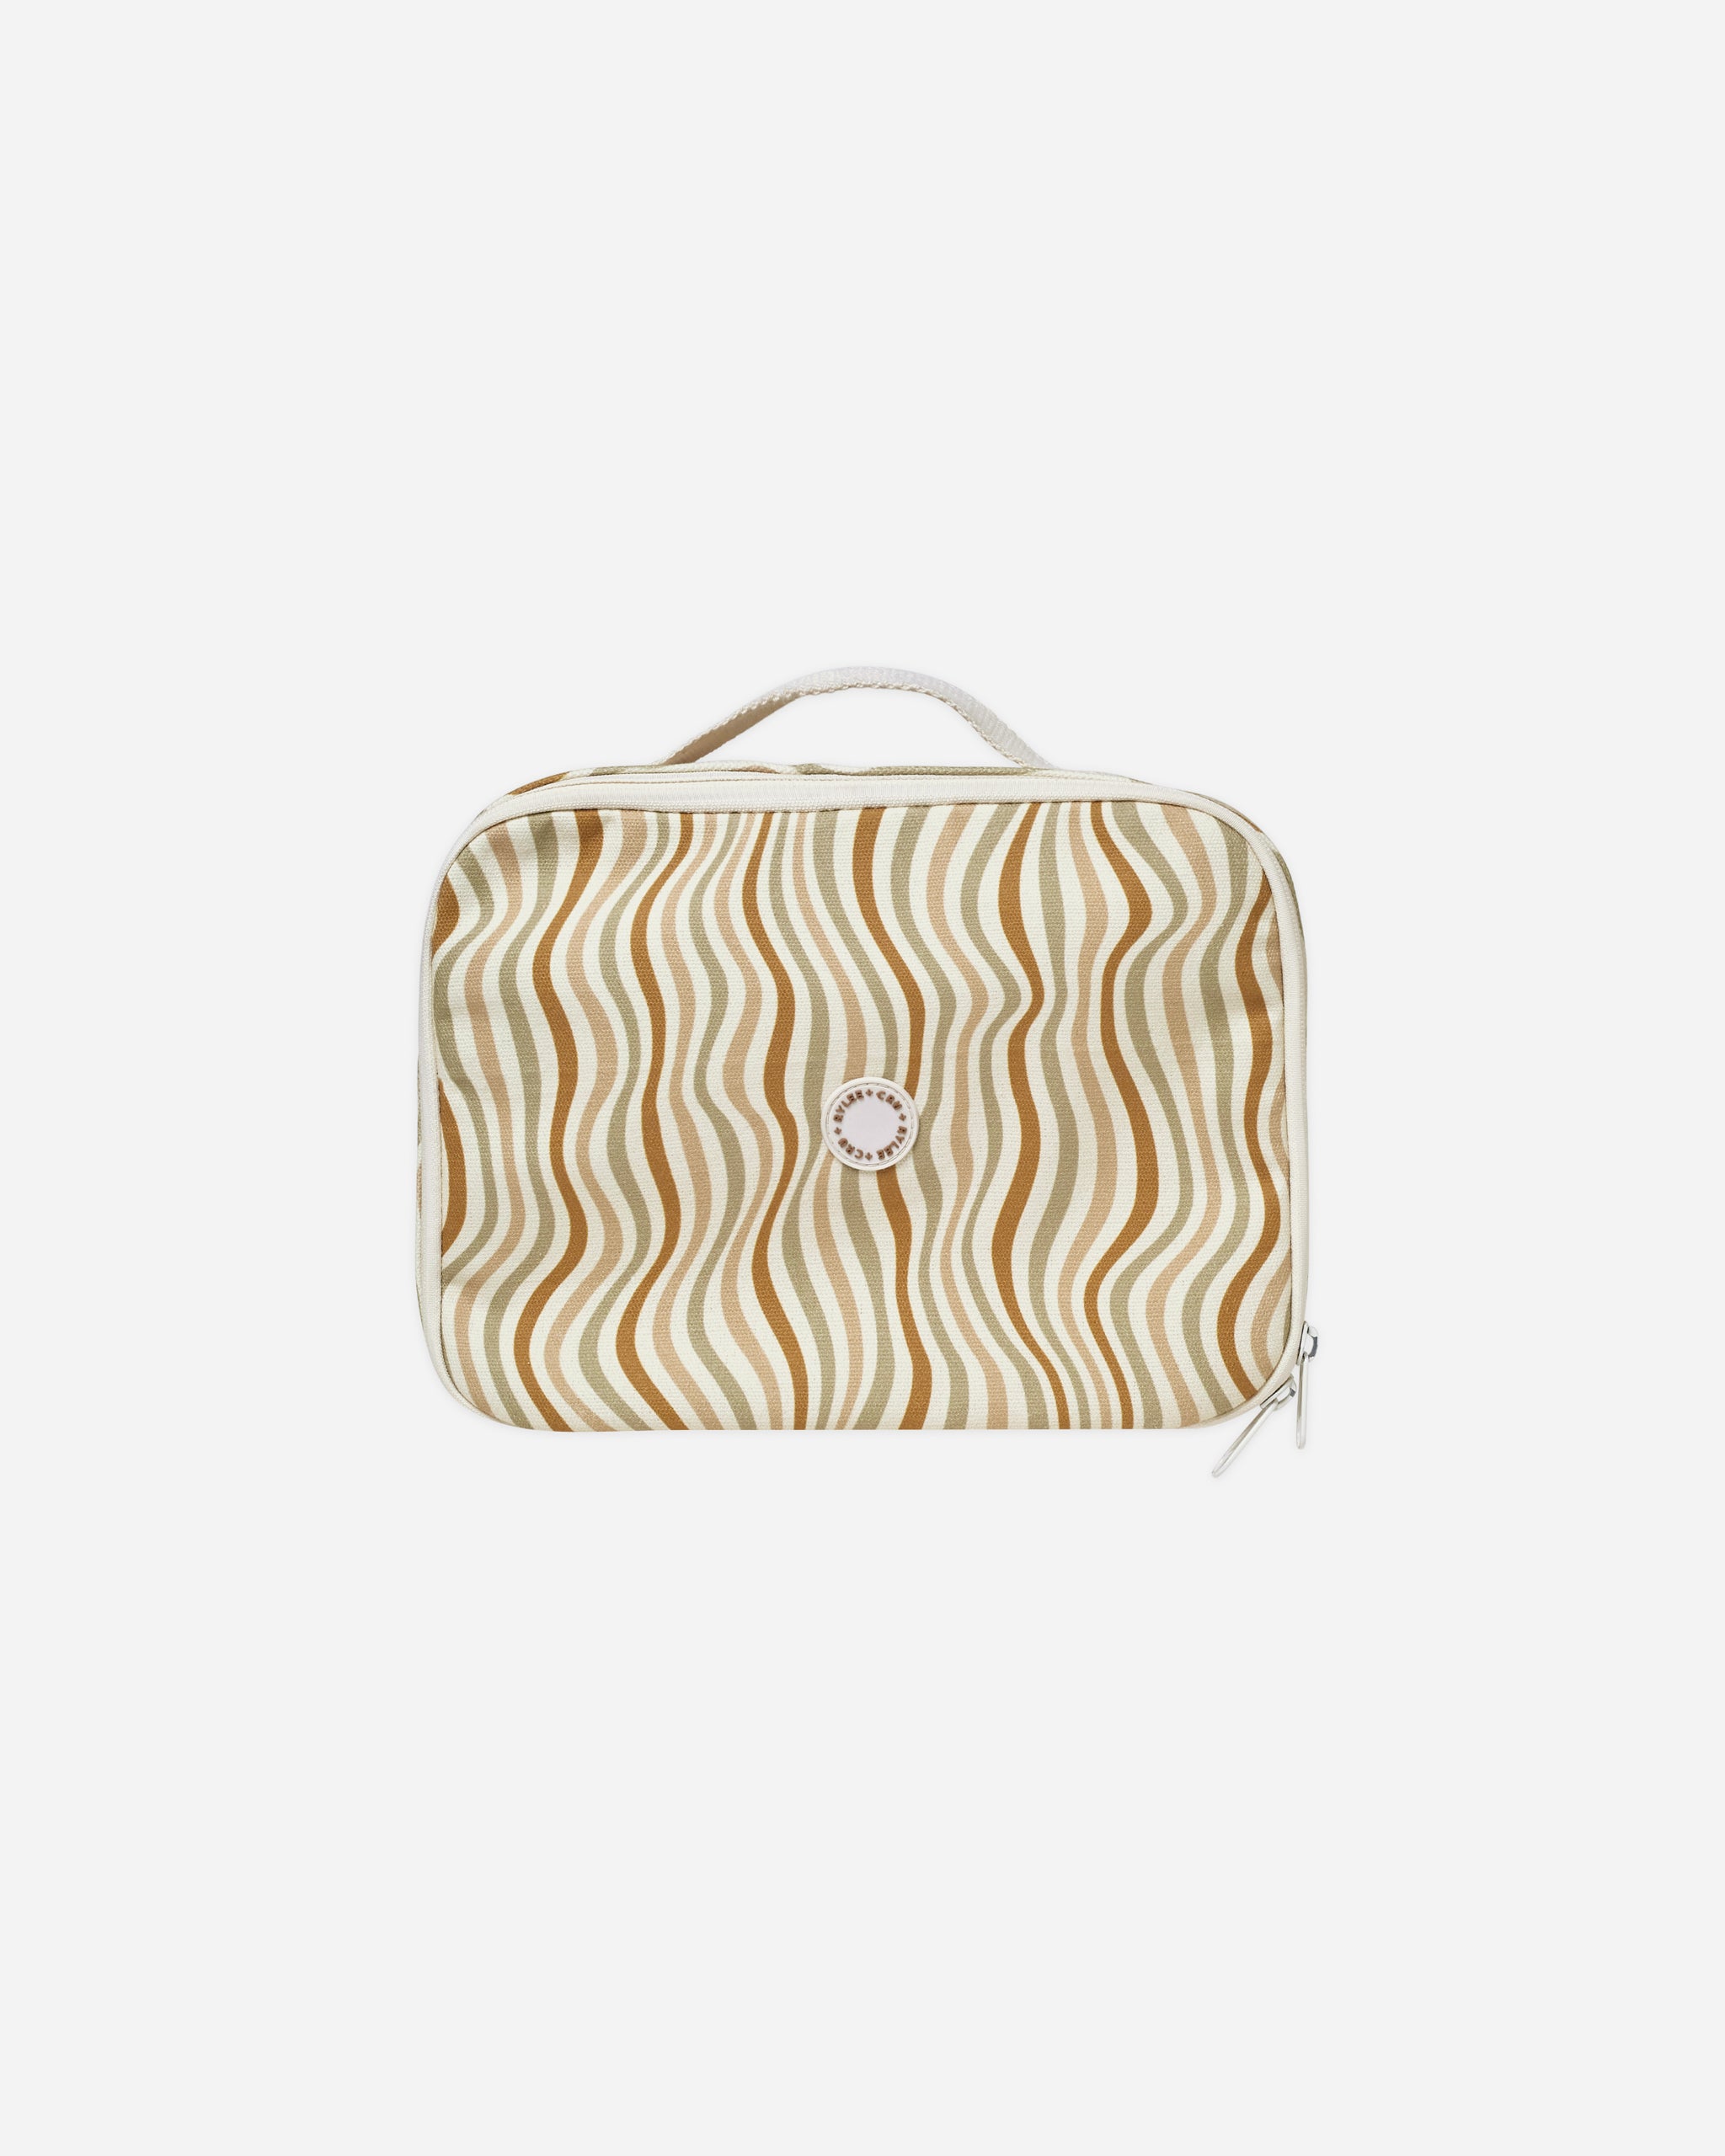 Lunch Bag | Retro Waves - Rylee + Cru | Kids Clothes | Trendy Baby Clothes | Modern Infant Outfits |